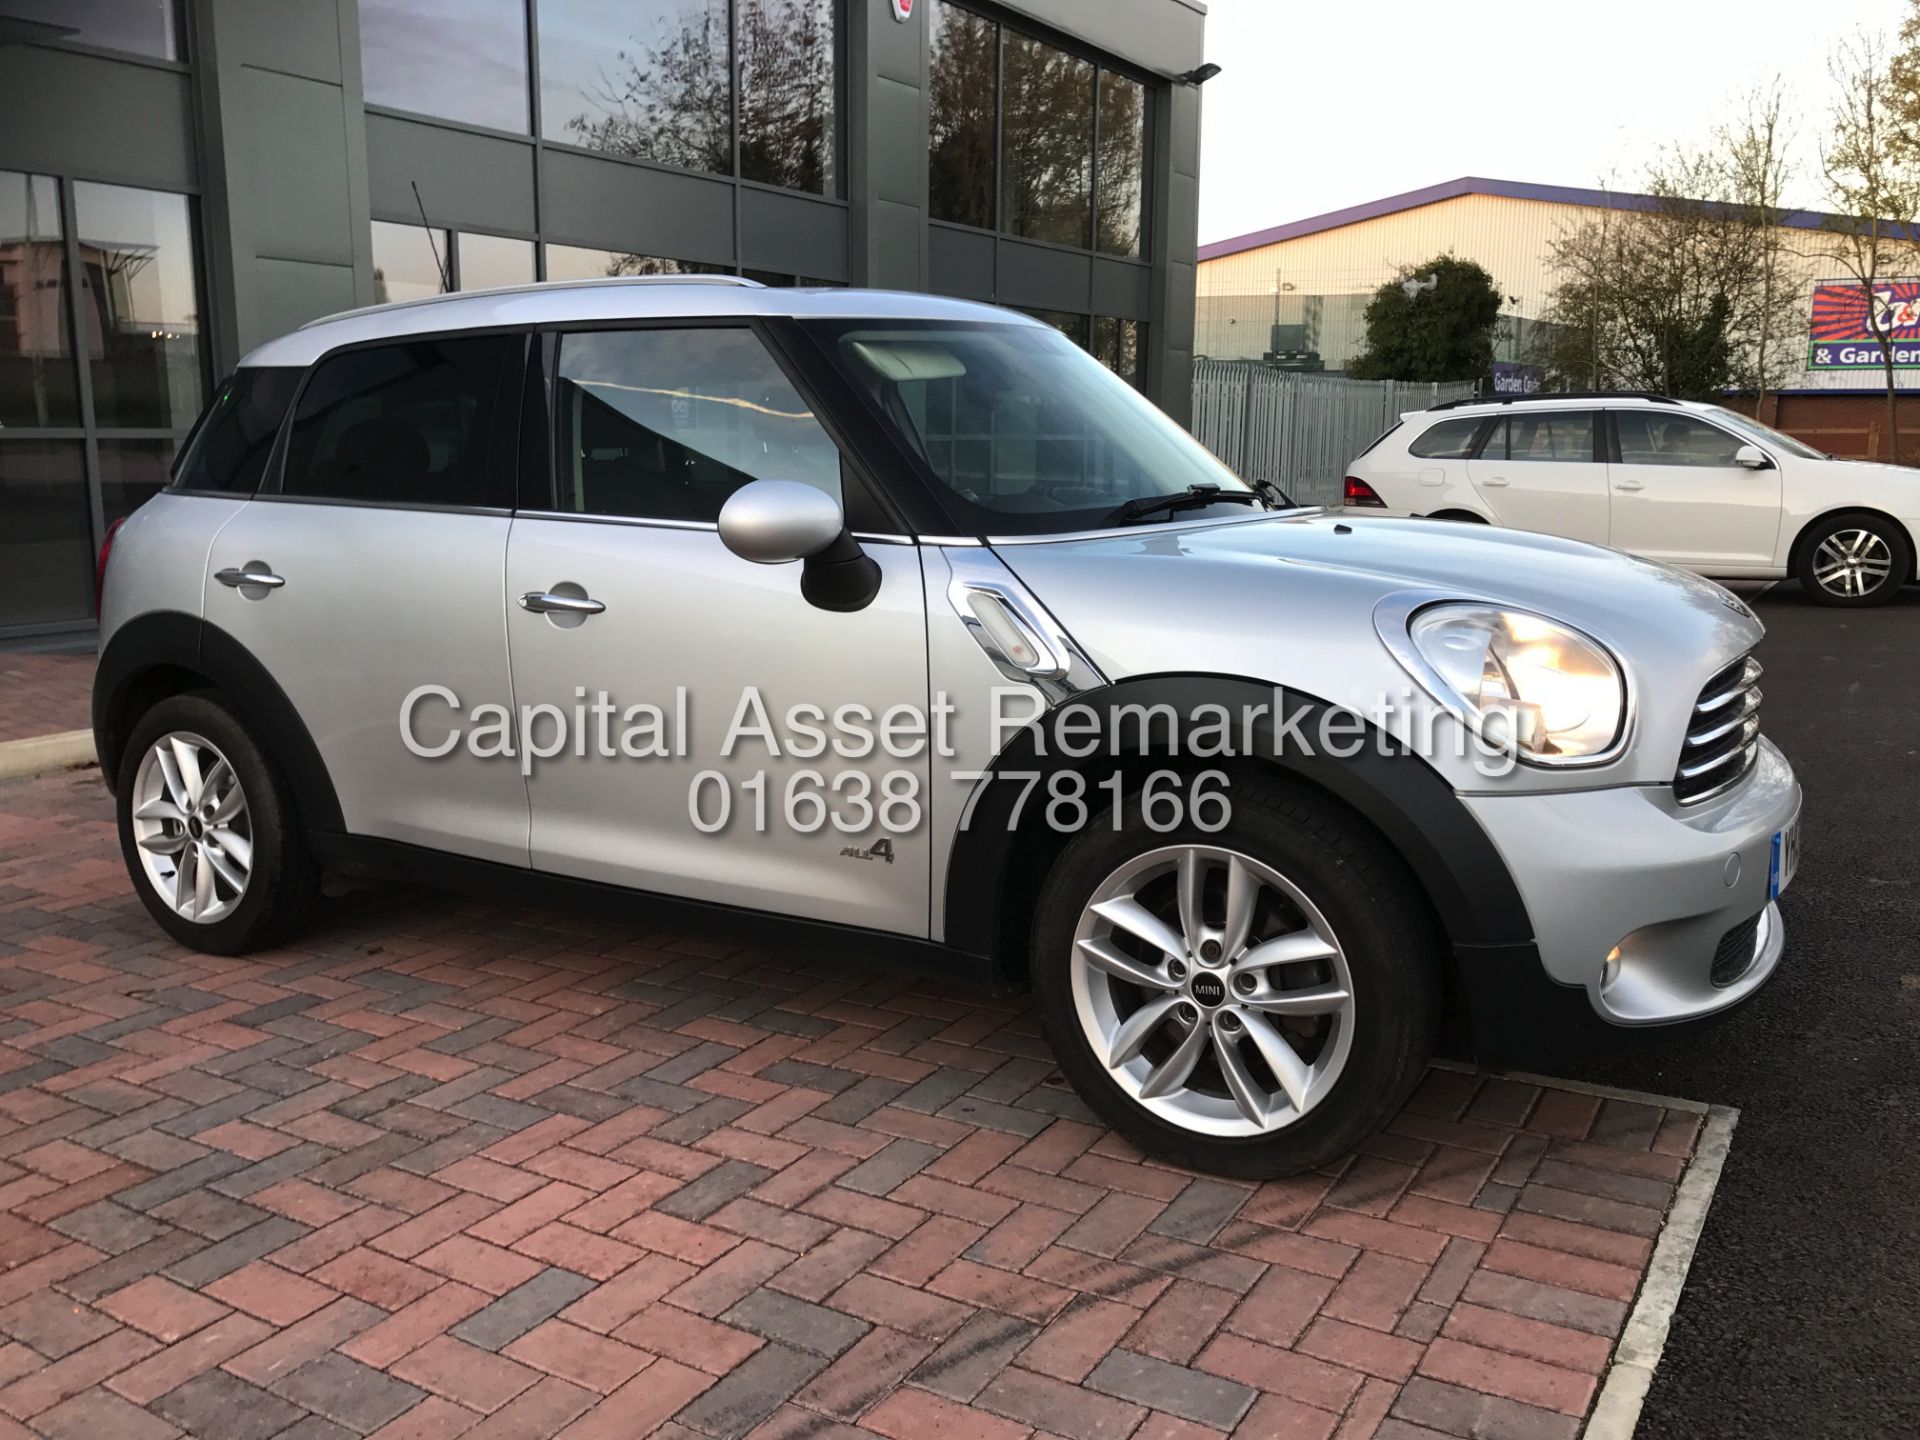 MINI COUNTRYMAN 1.6 "COOPER D" ALL4 (13 REG) SPORTS MODE-LEATHER -CLIMATE-STAMPED HISTORY-GREAT SPEC